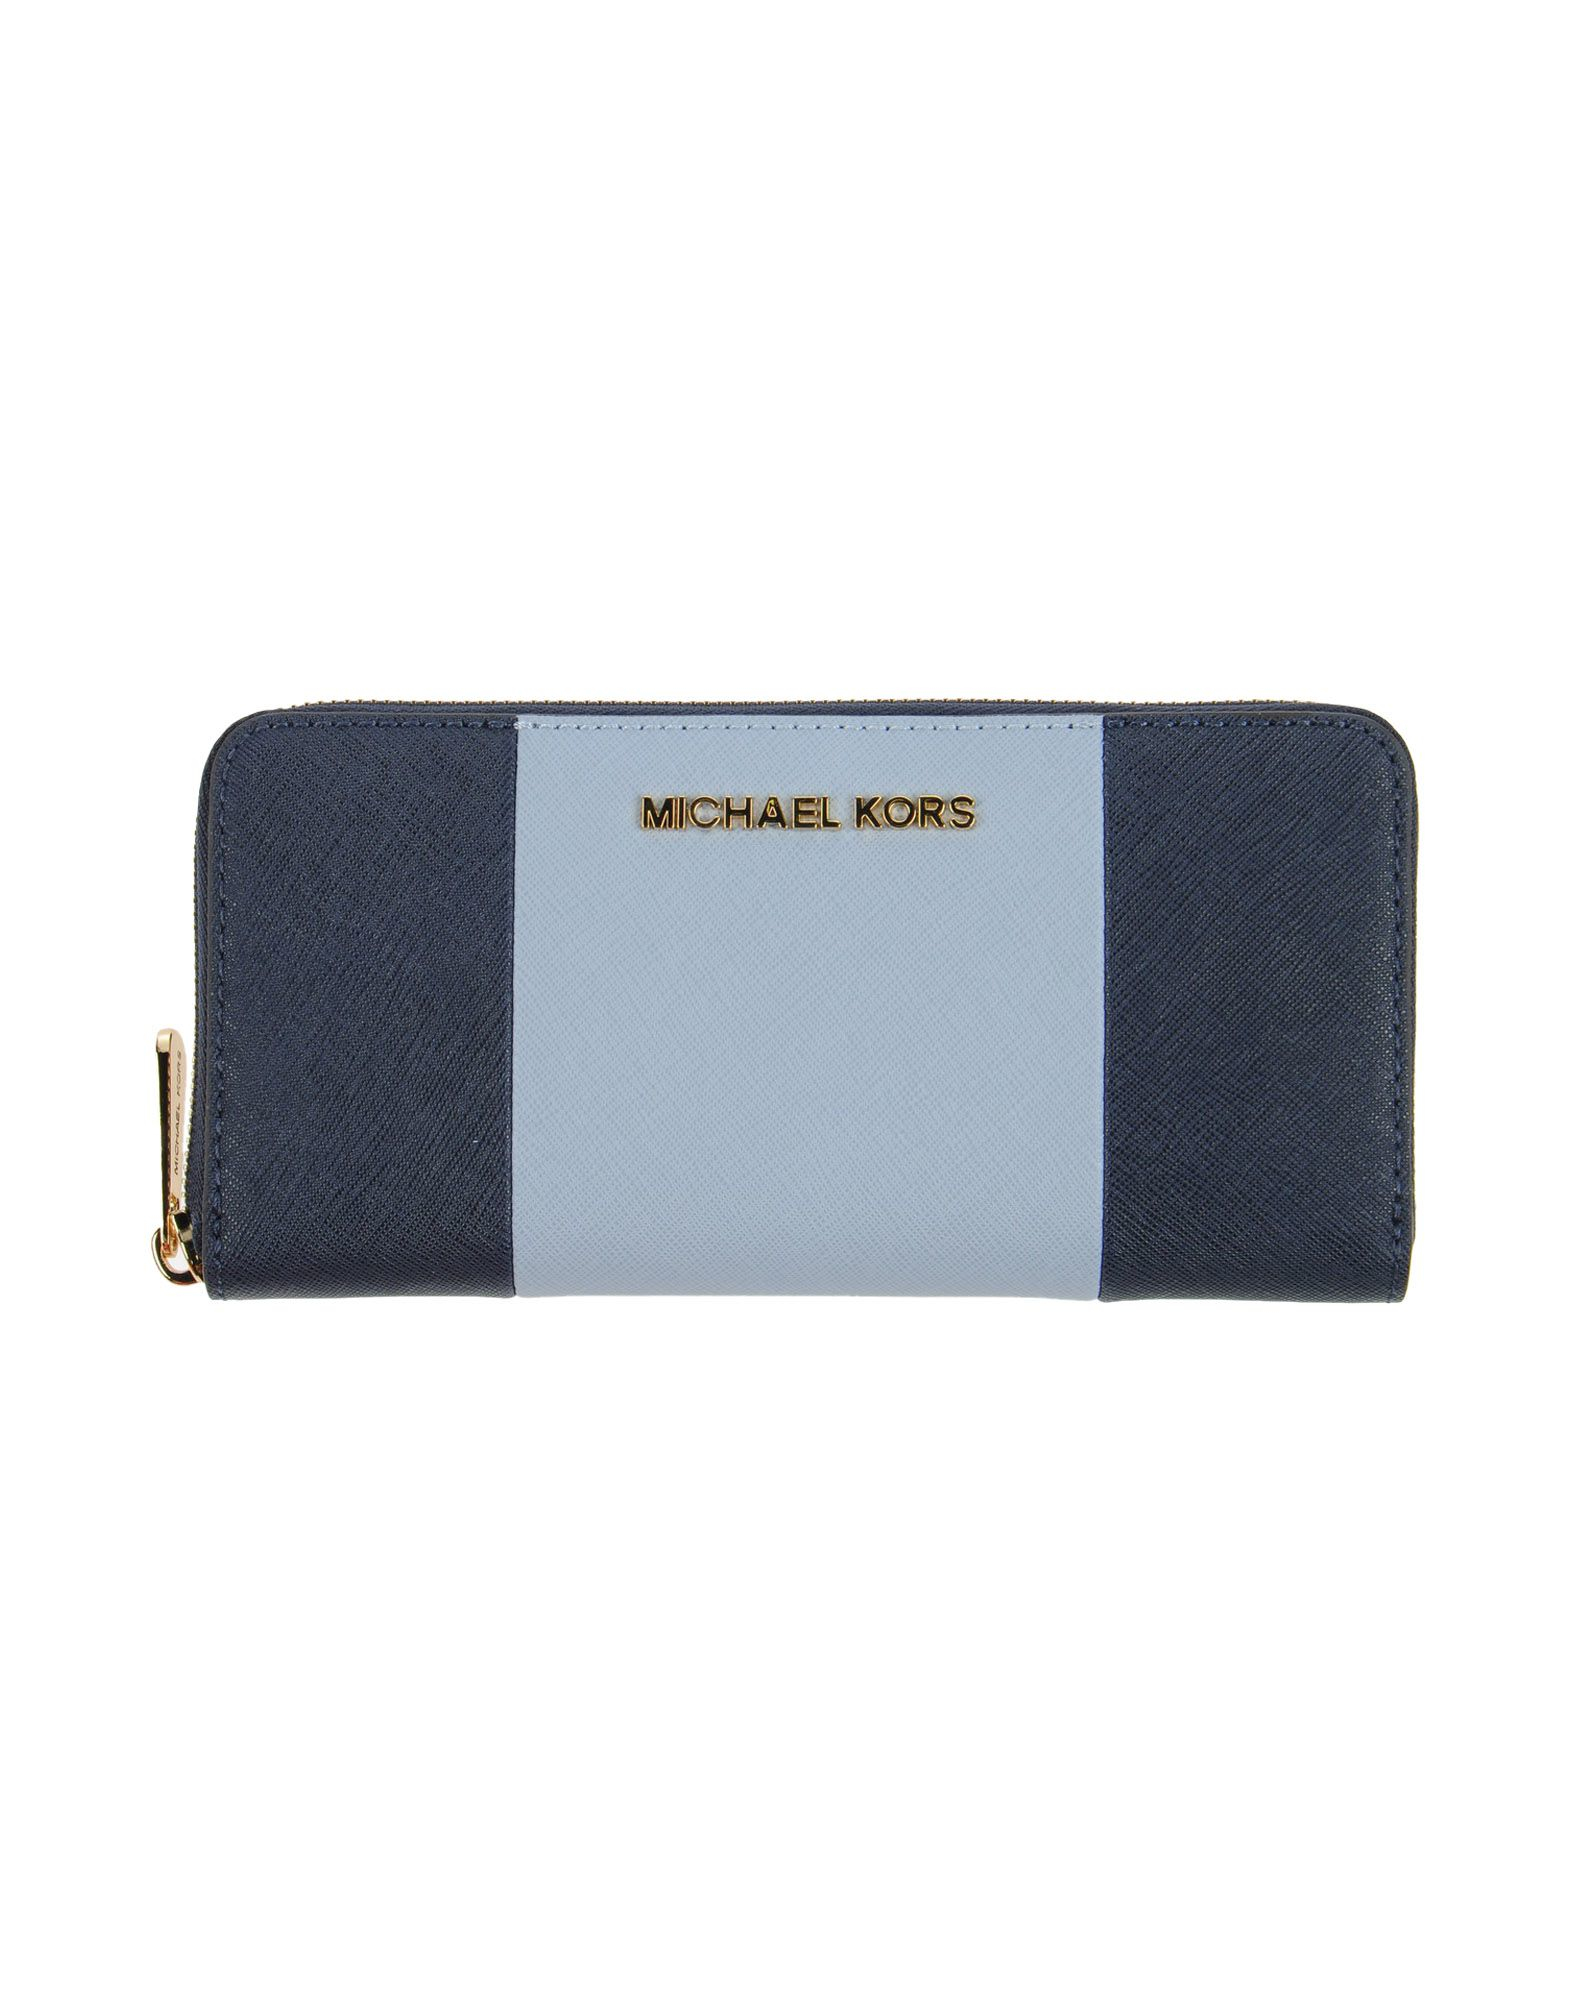 blue and white michael kors wallet